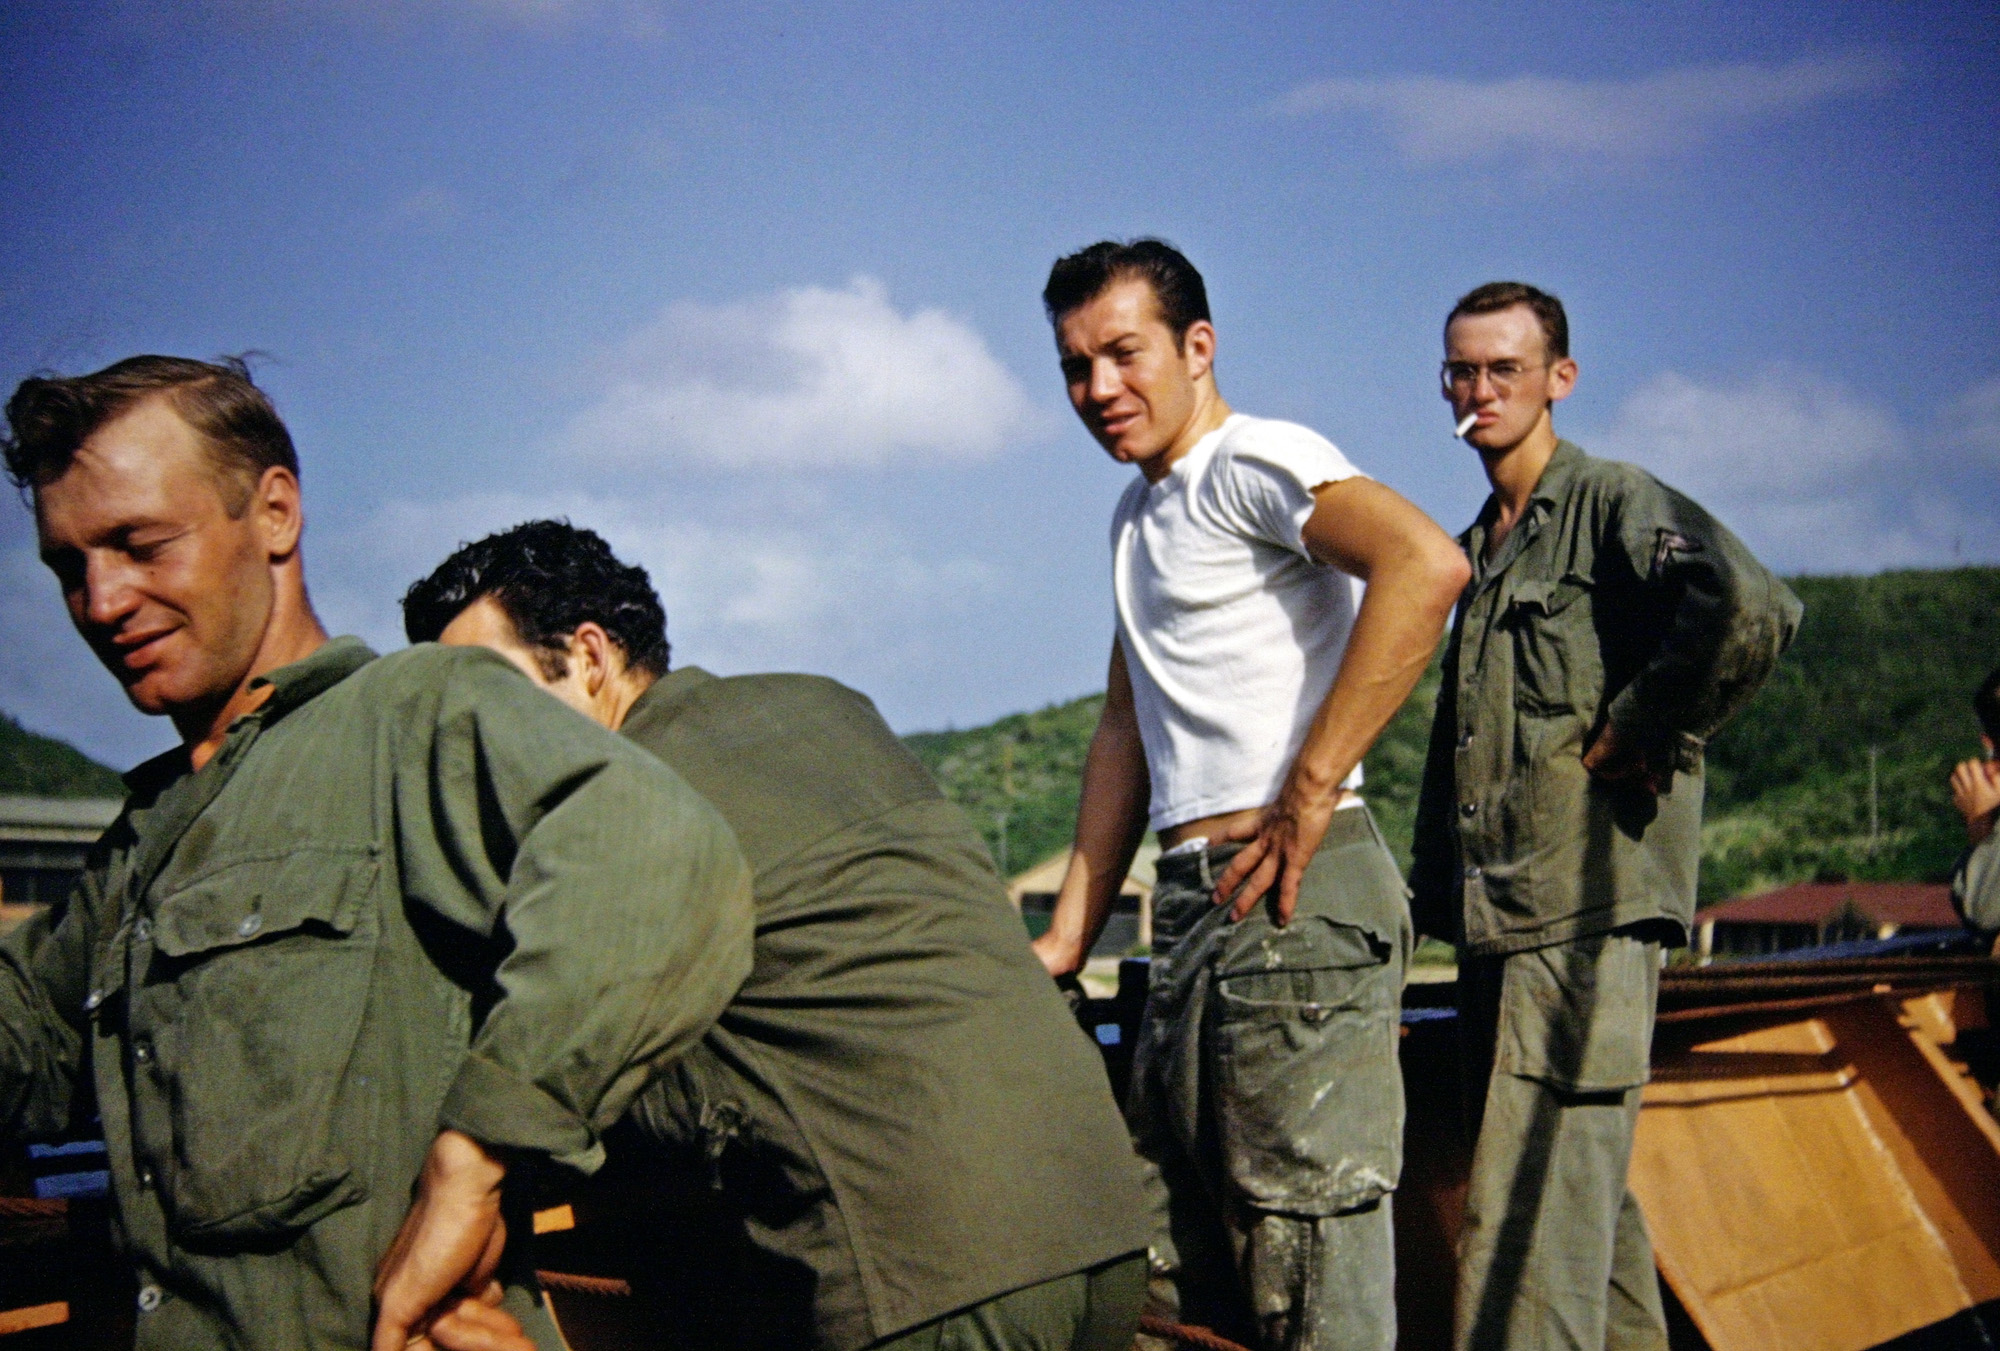 My brother's buddies on a brief cruise. Puerto Rico 1949. View full size.